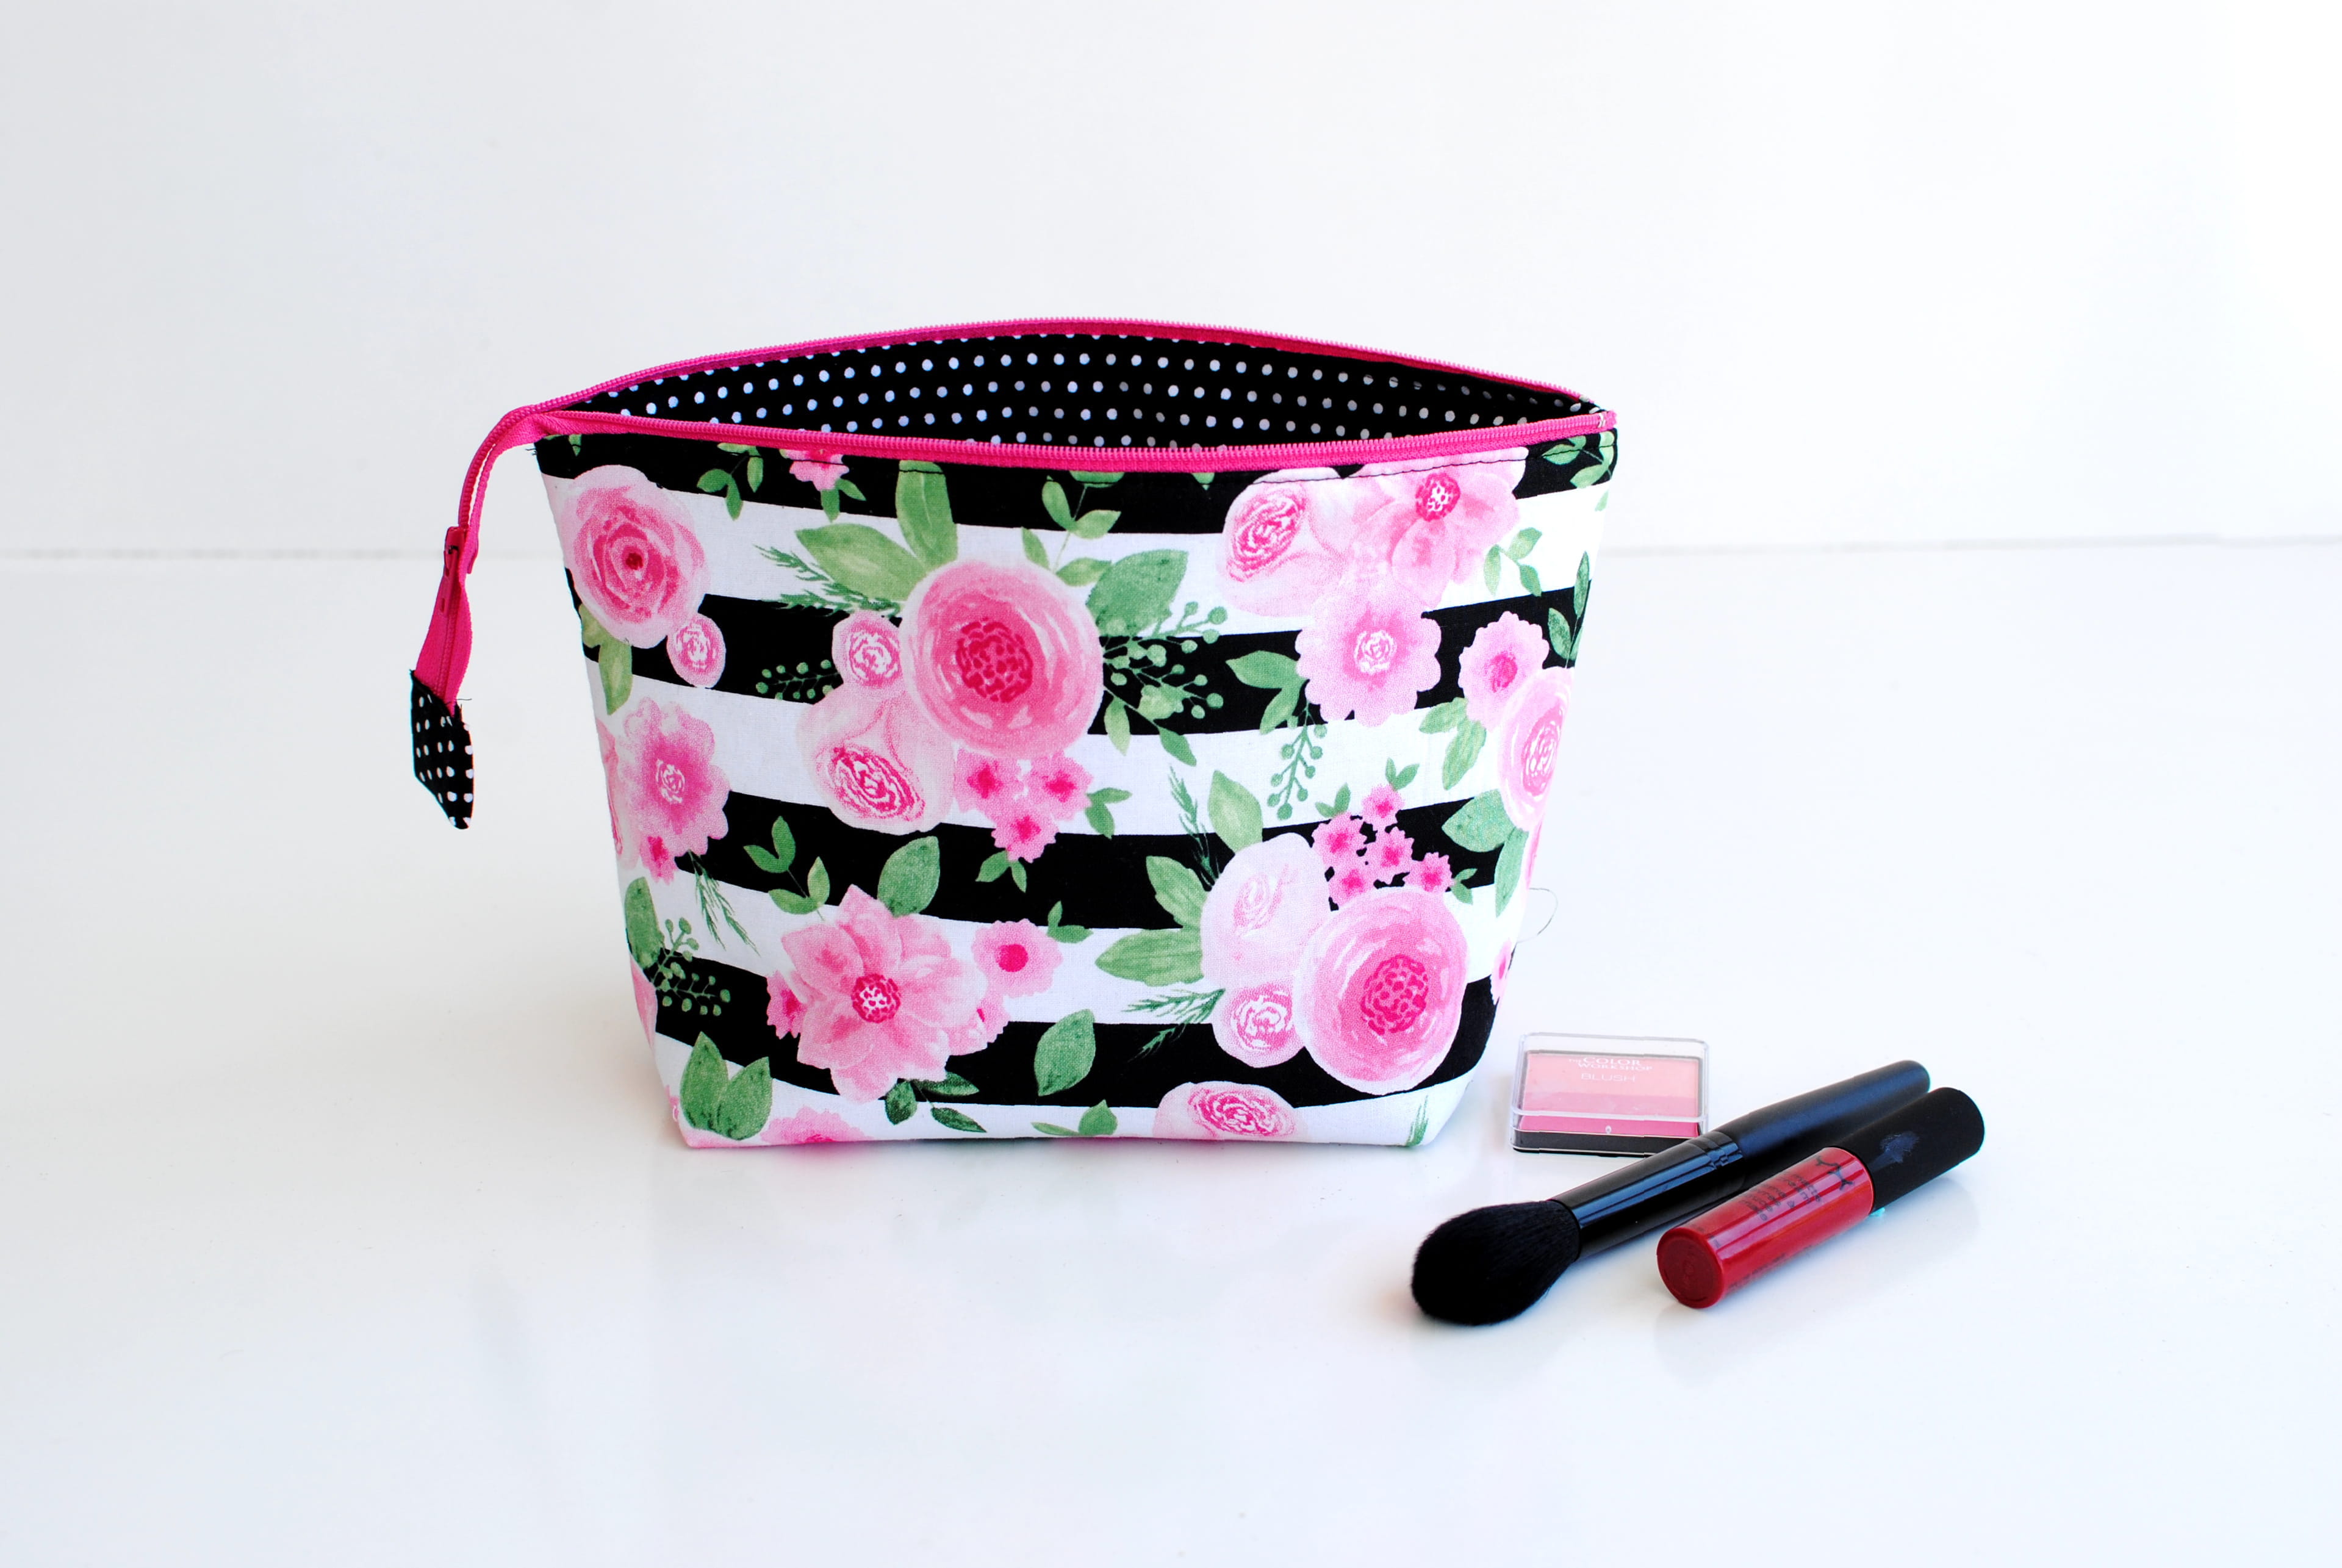 WELLinsulated Beauty Bag SIlver | Makeup Bags + Organizers - WELLinsulated®